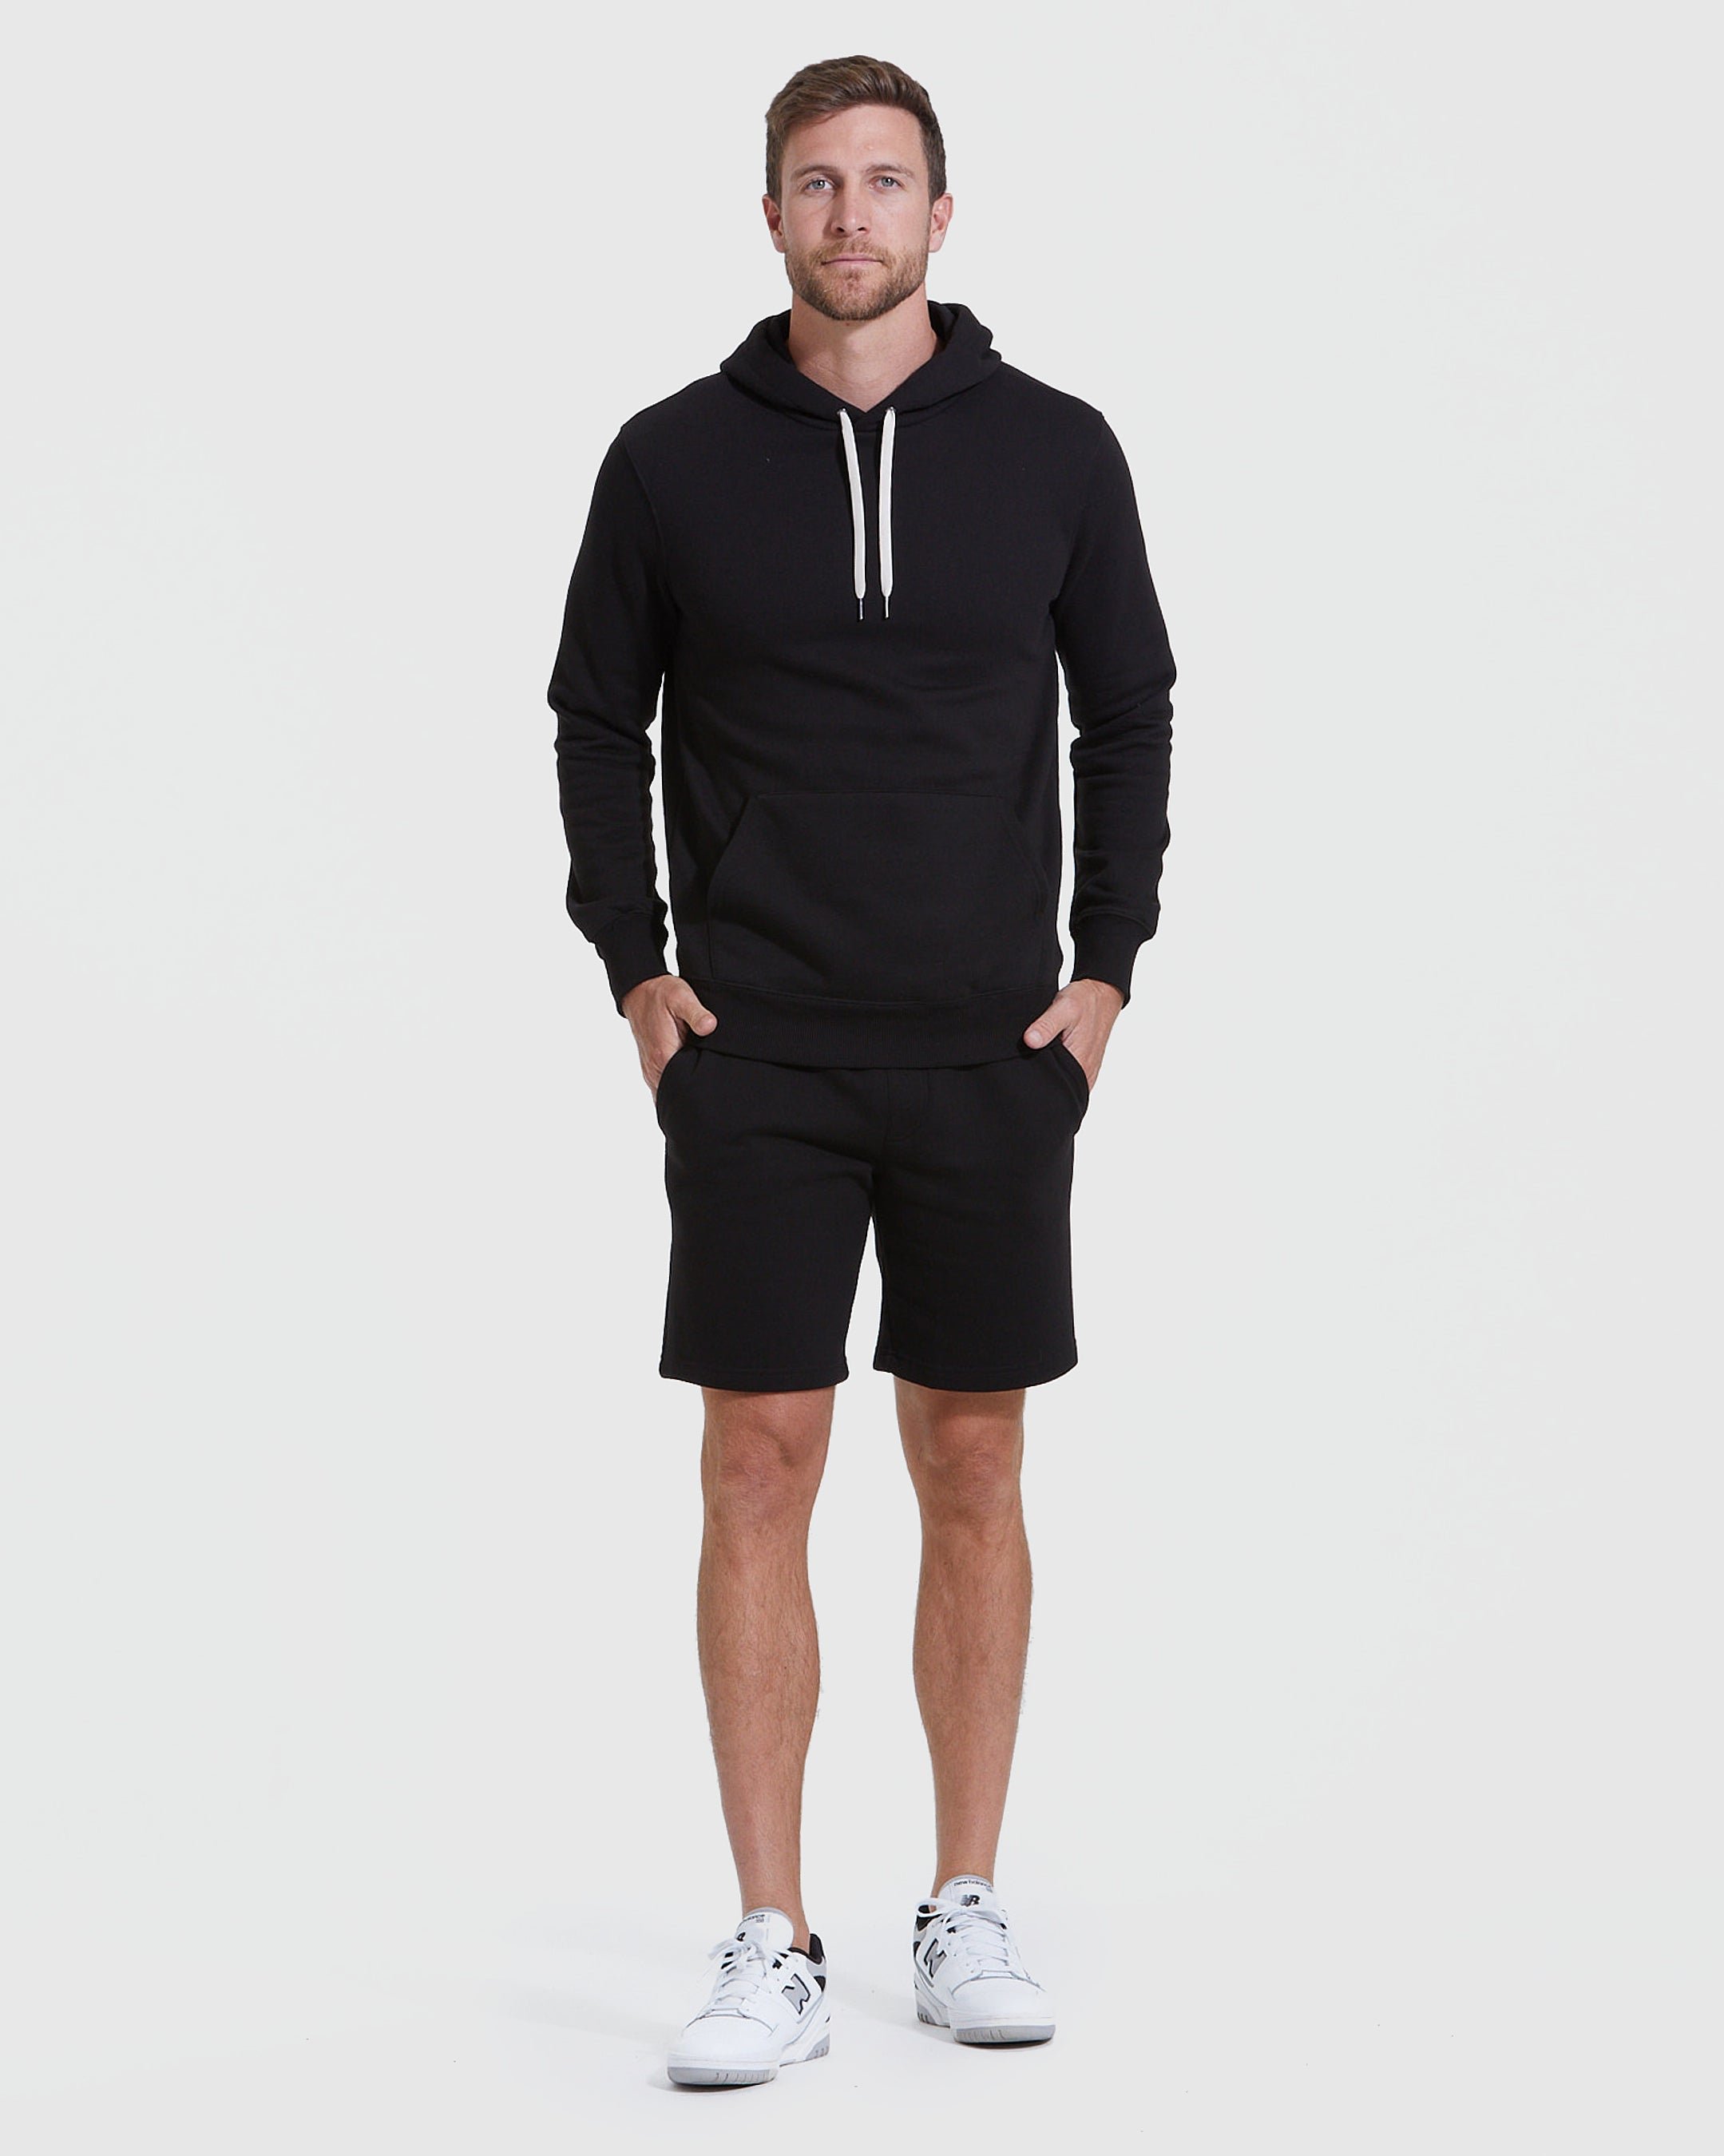 Black Fleece French Terry Pullover Hoodie